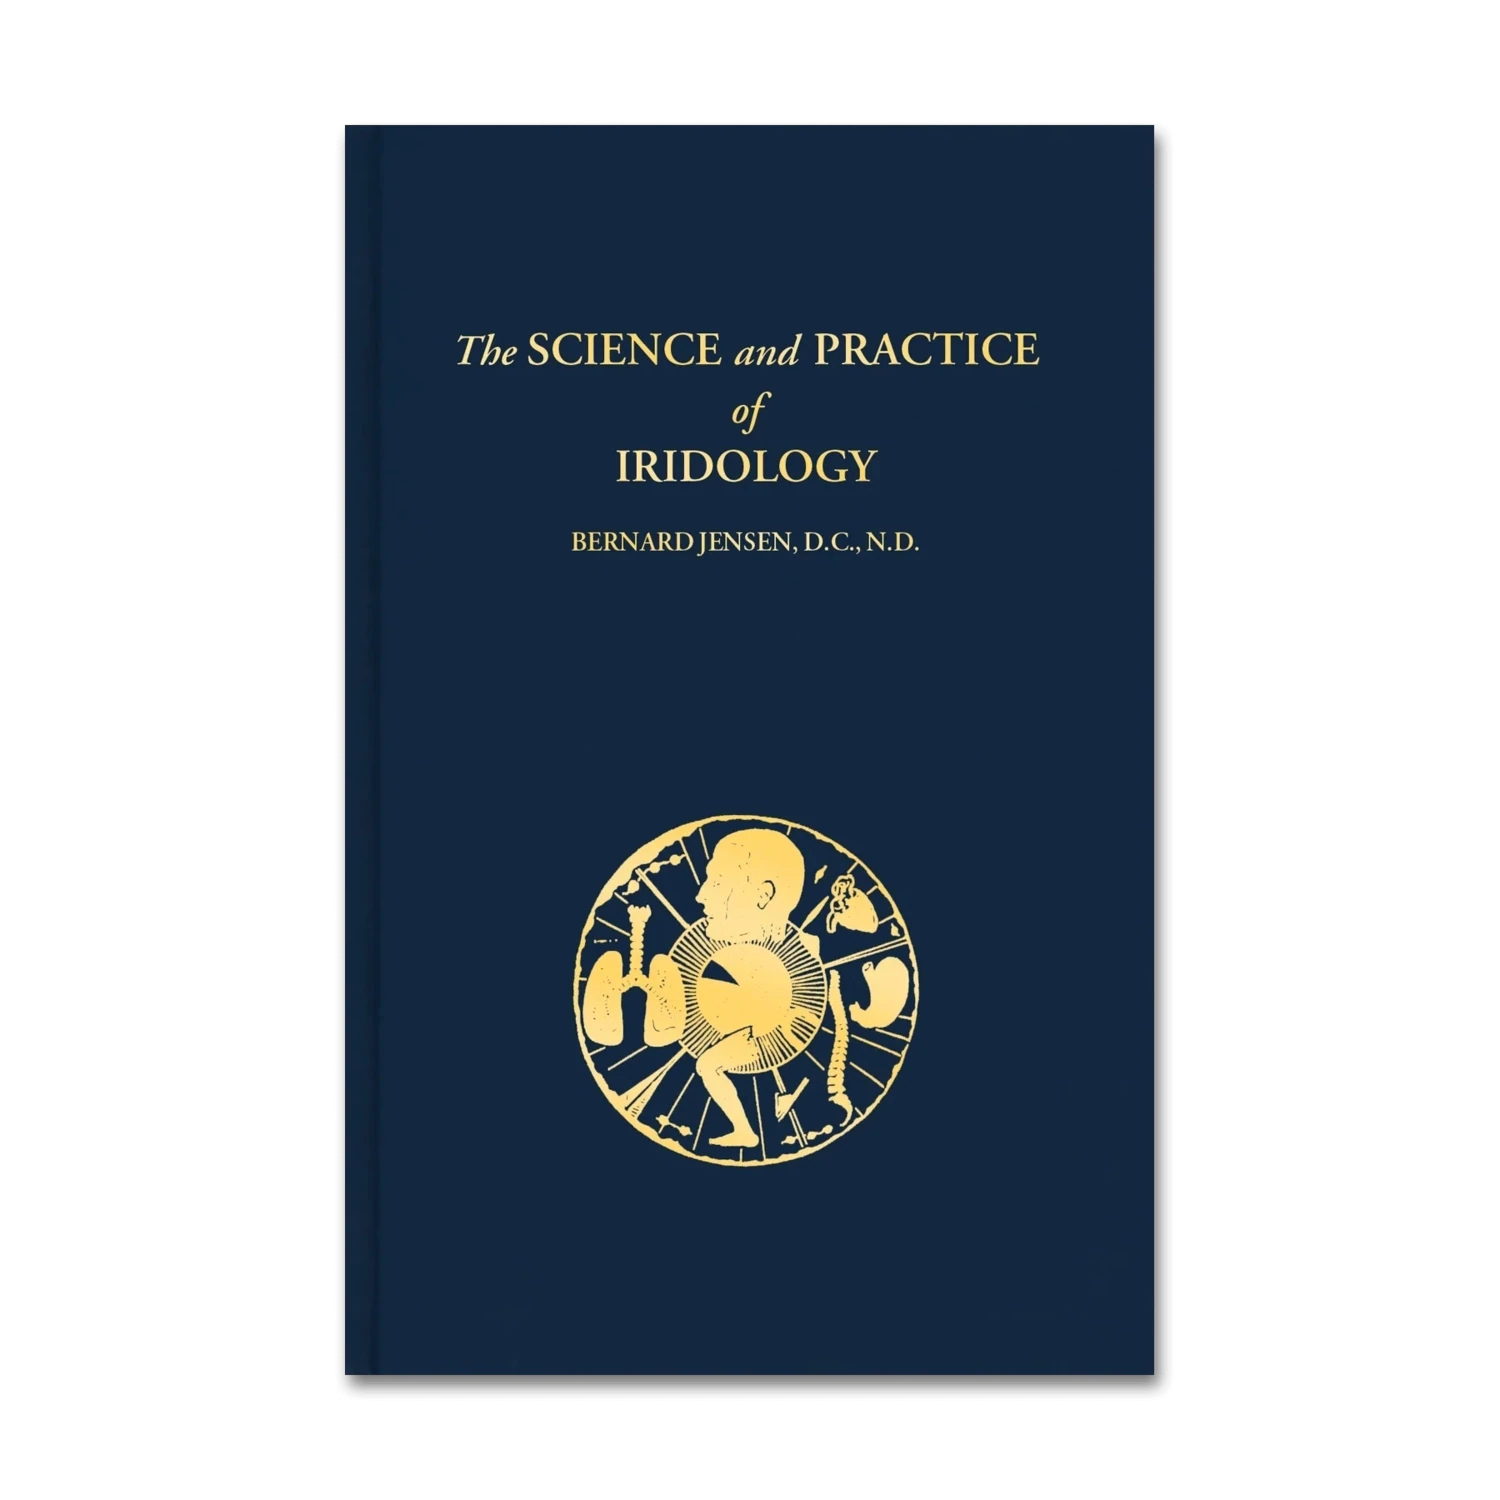 The science and practice of iridology* (Jensen)